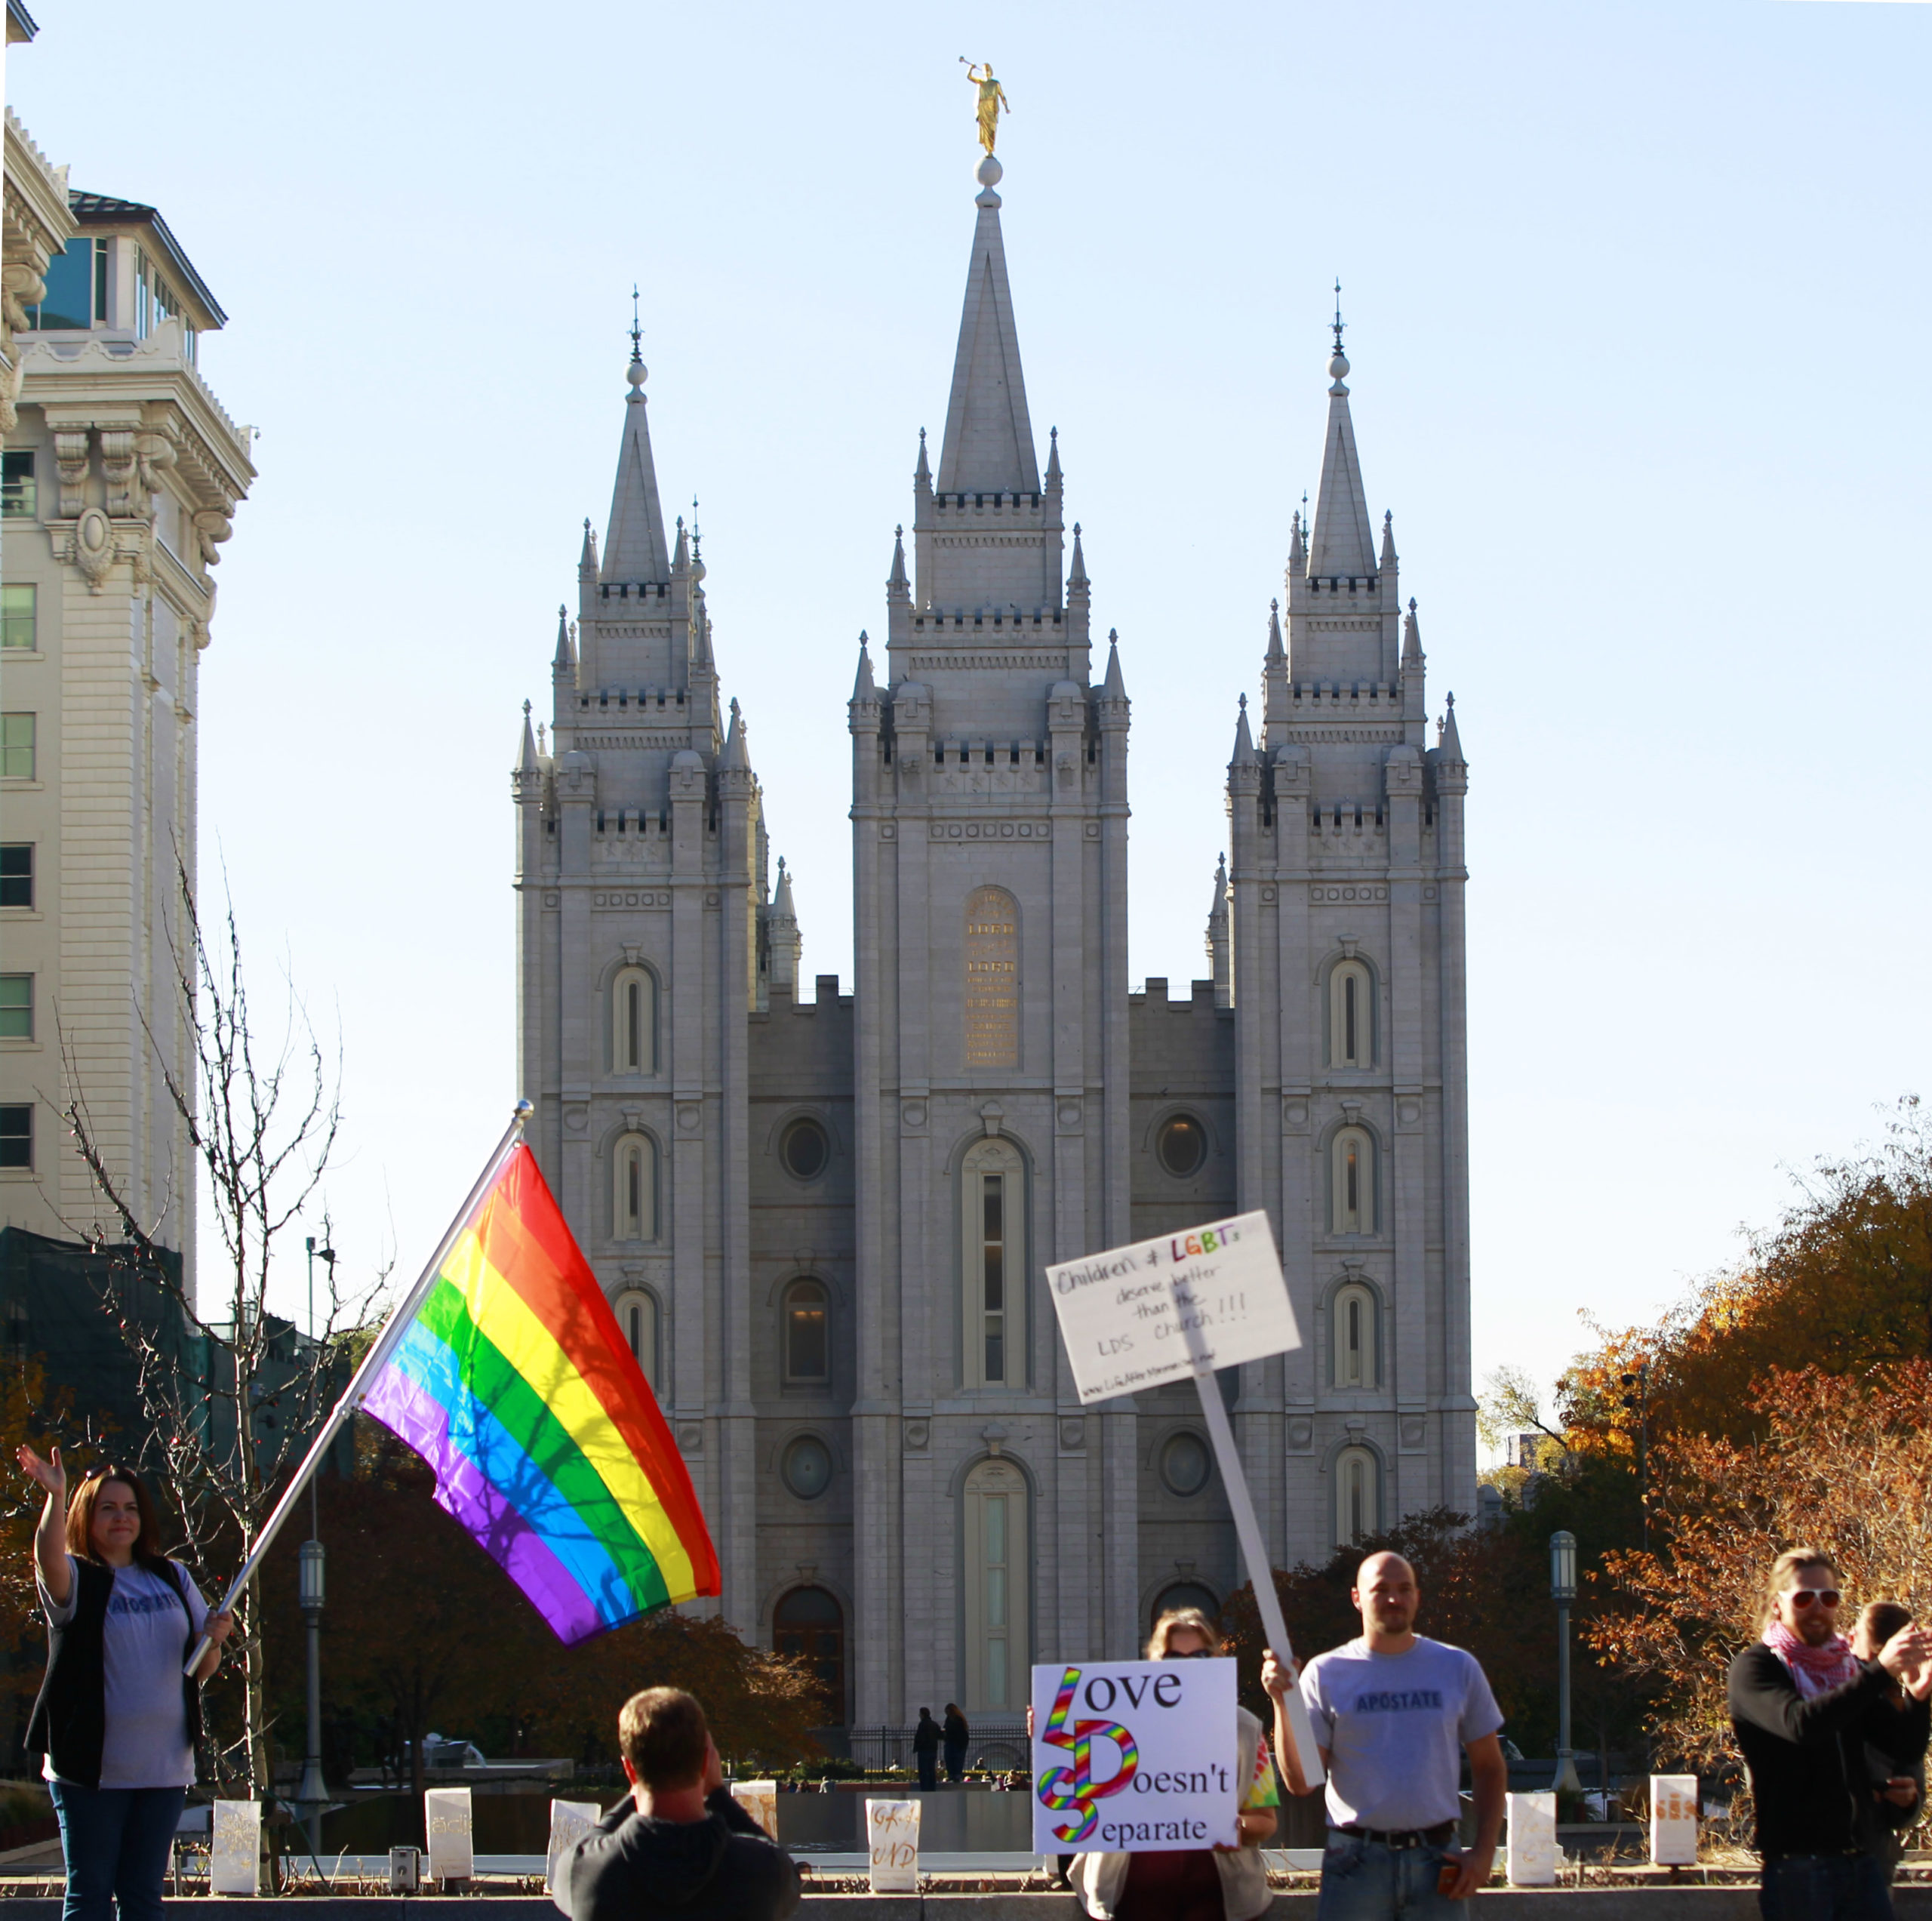 Protesters hold signs and a pride flag in front of the historic Mormon temple after many submitted their resignations from the Church of Jesus Christ of Latter-Day Saints in response to a recent change in church policy towards married LGBT same sex couples and their children on November 14, 2015 in Salt Lake City, Utah. A little over a week ago the Mormon church made a change in their official handbook of instructions requiring a disciplinary council and possible excommunication for same sex couples and banning the blessing and baptism of their children into the church. (Photo by George Frey/Getty Images)